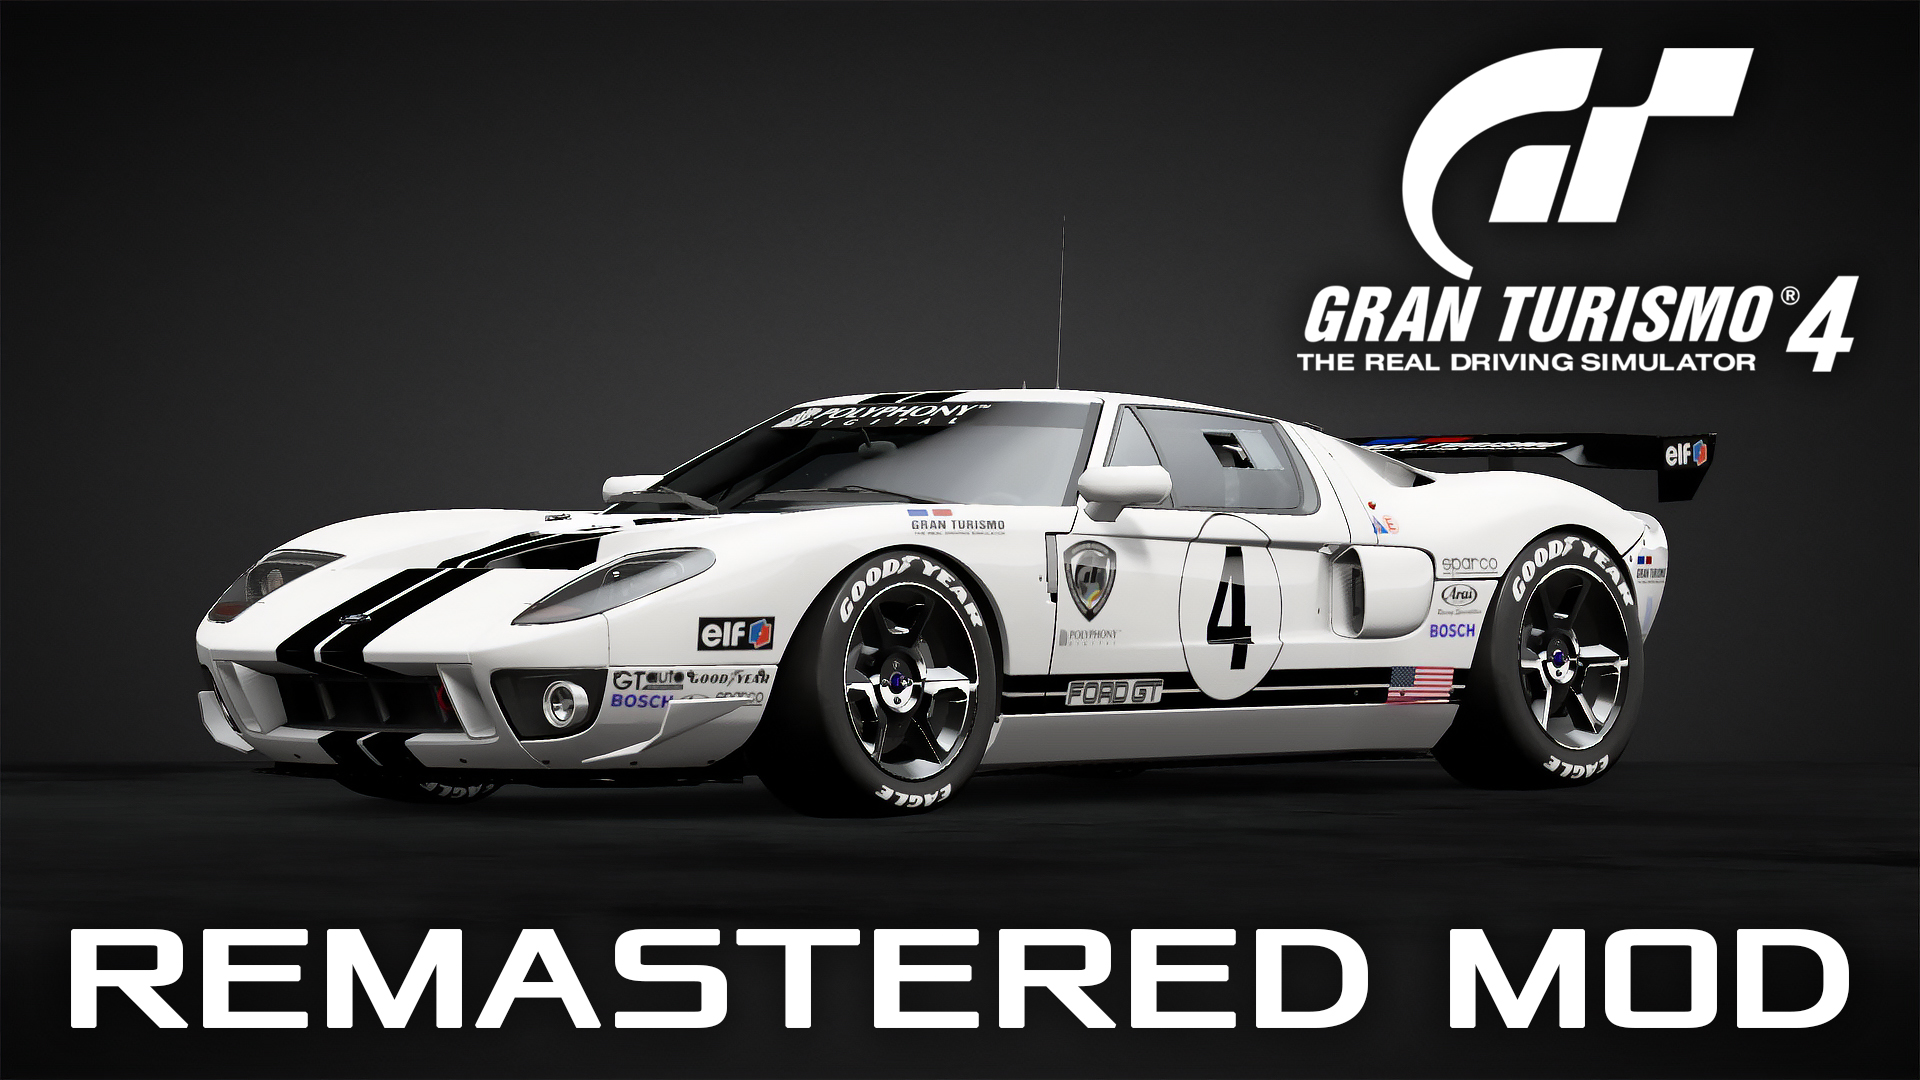 Gran Turismo 4 gets remastered on PC thanks to these mods